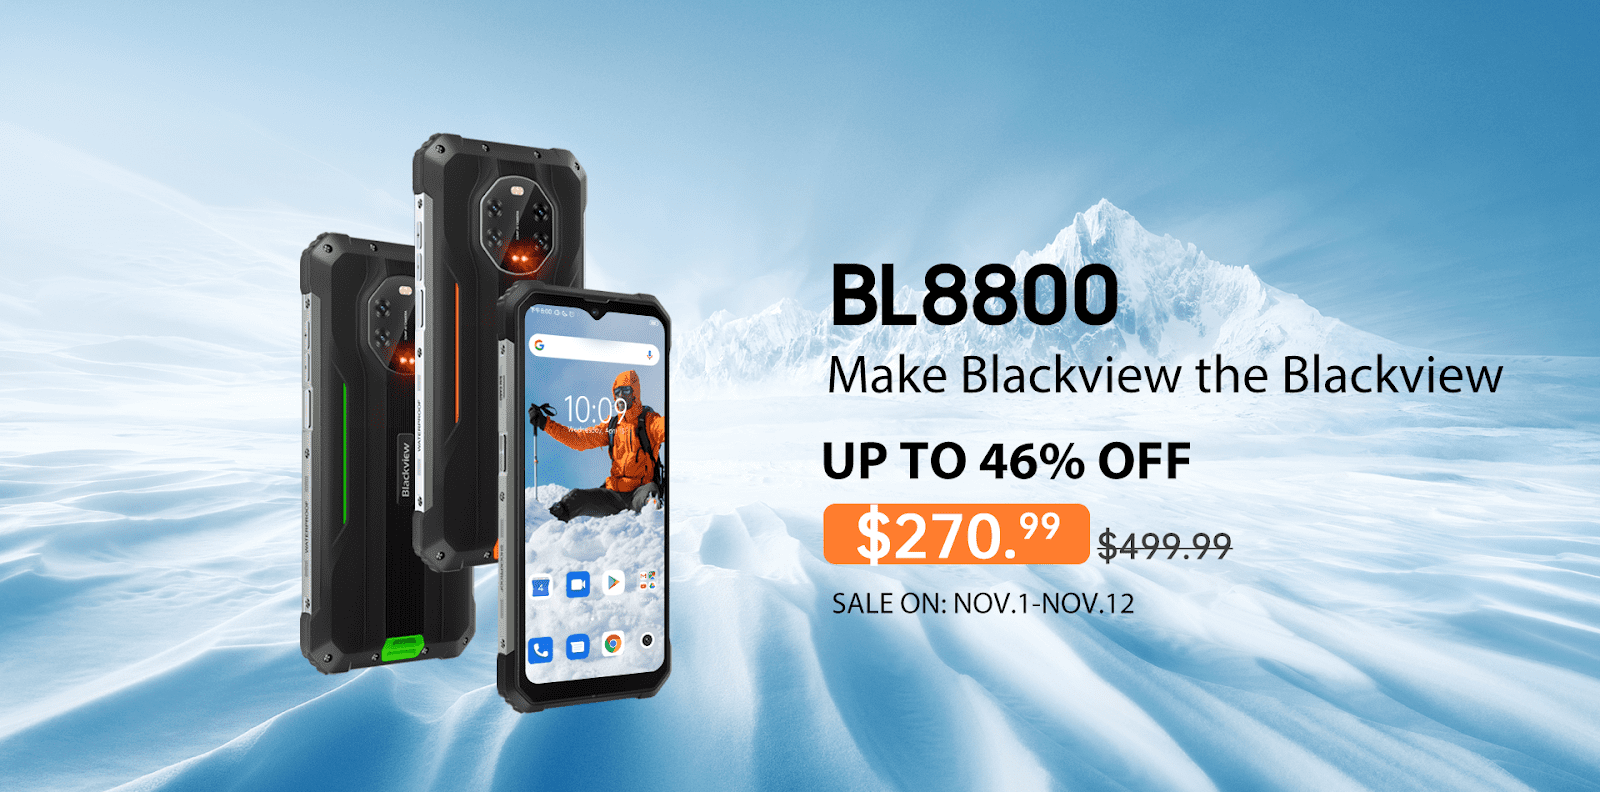 Top Blackview Deals for AliExpress 11.11 Super Sale with Up to 55% Off